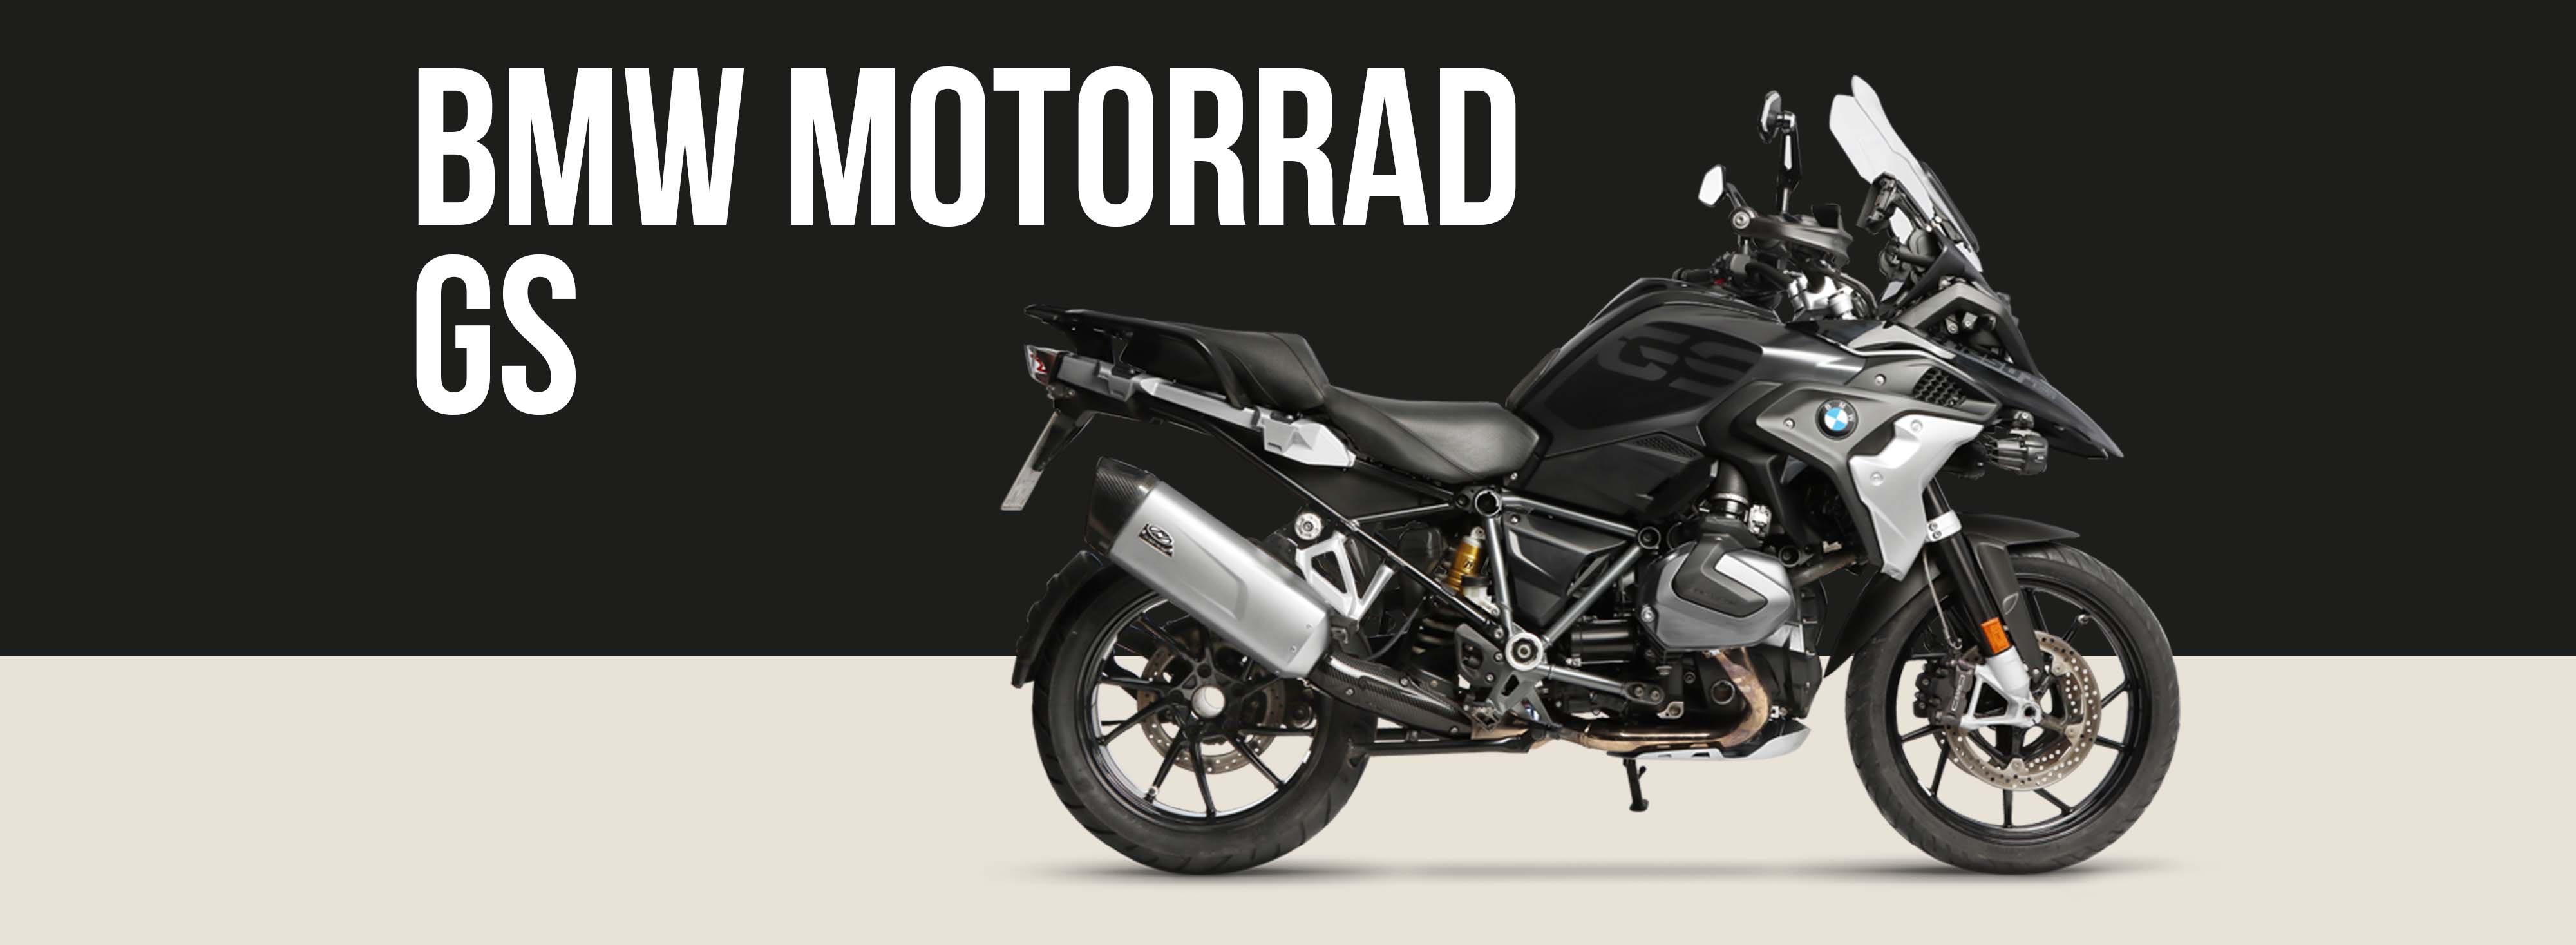 BMW R18 Motorcycle Brand Page Header